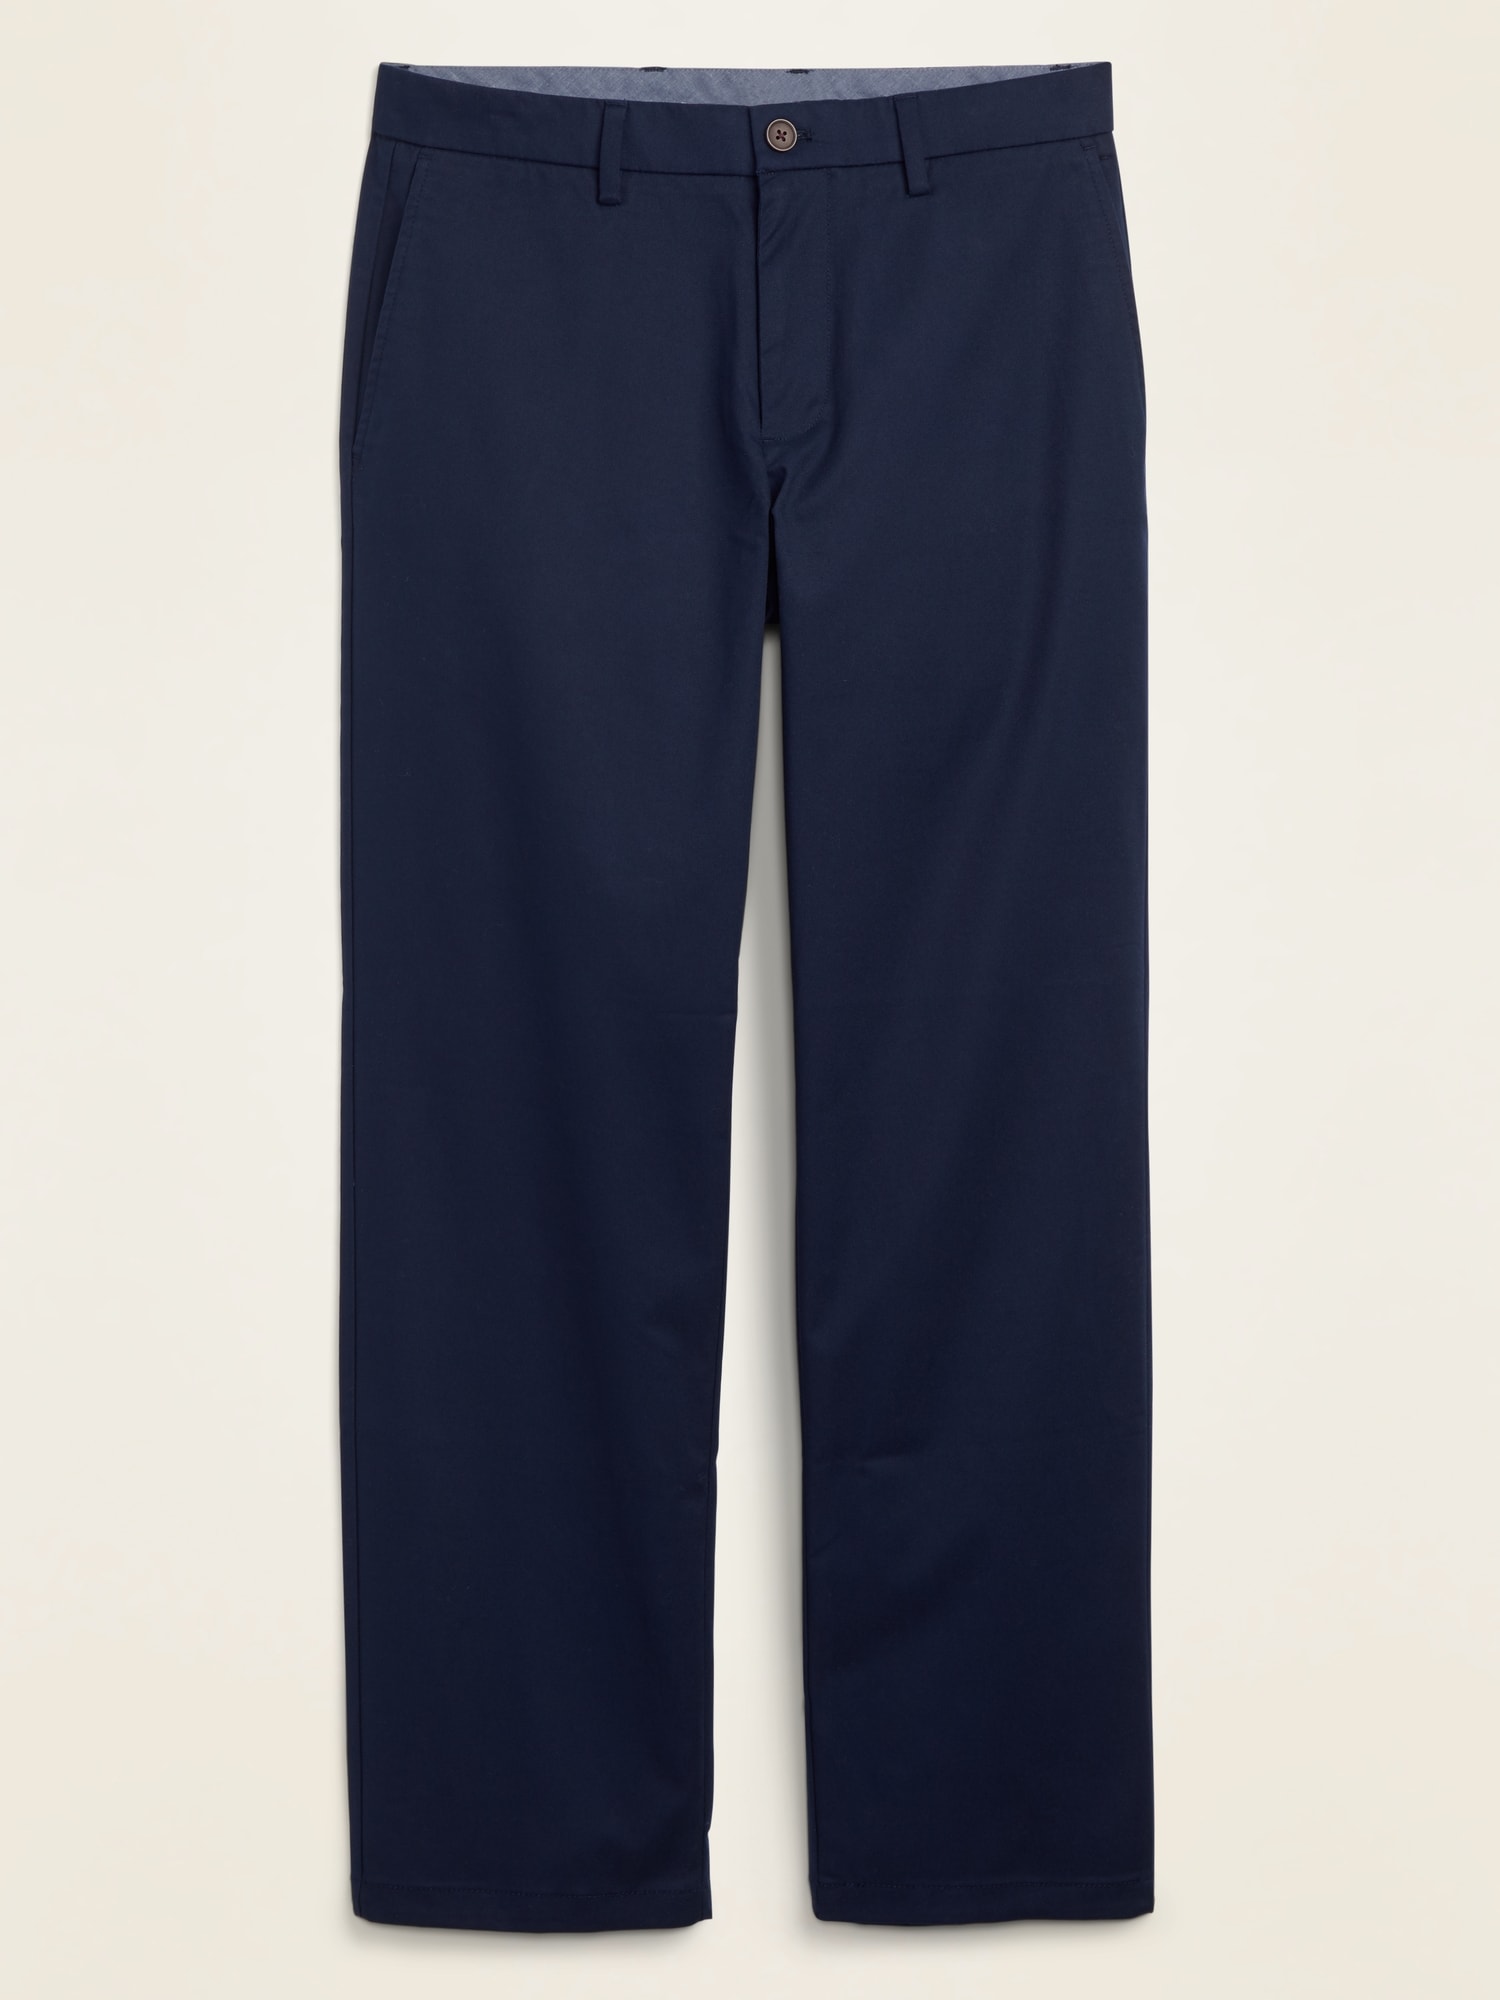 Loose Ultimate Built-In Flex Chino Pants